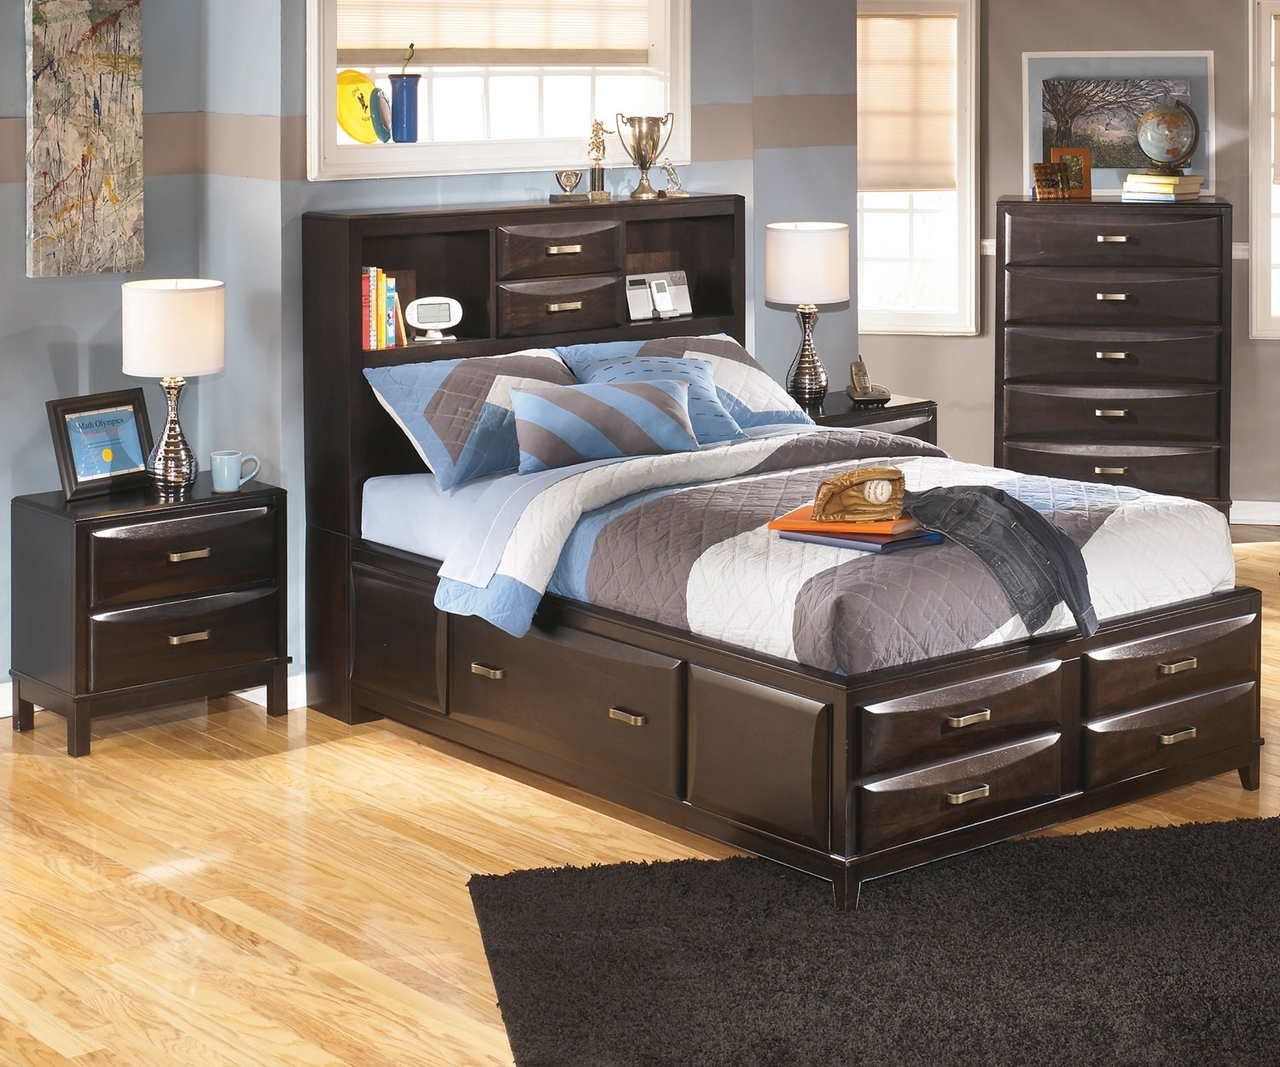 6 Things You’ll Love About A Storage Bed In Your Master Bedroom